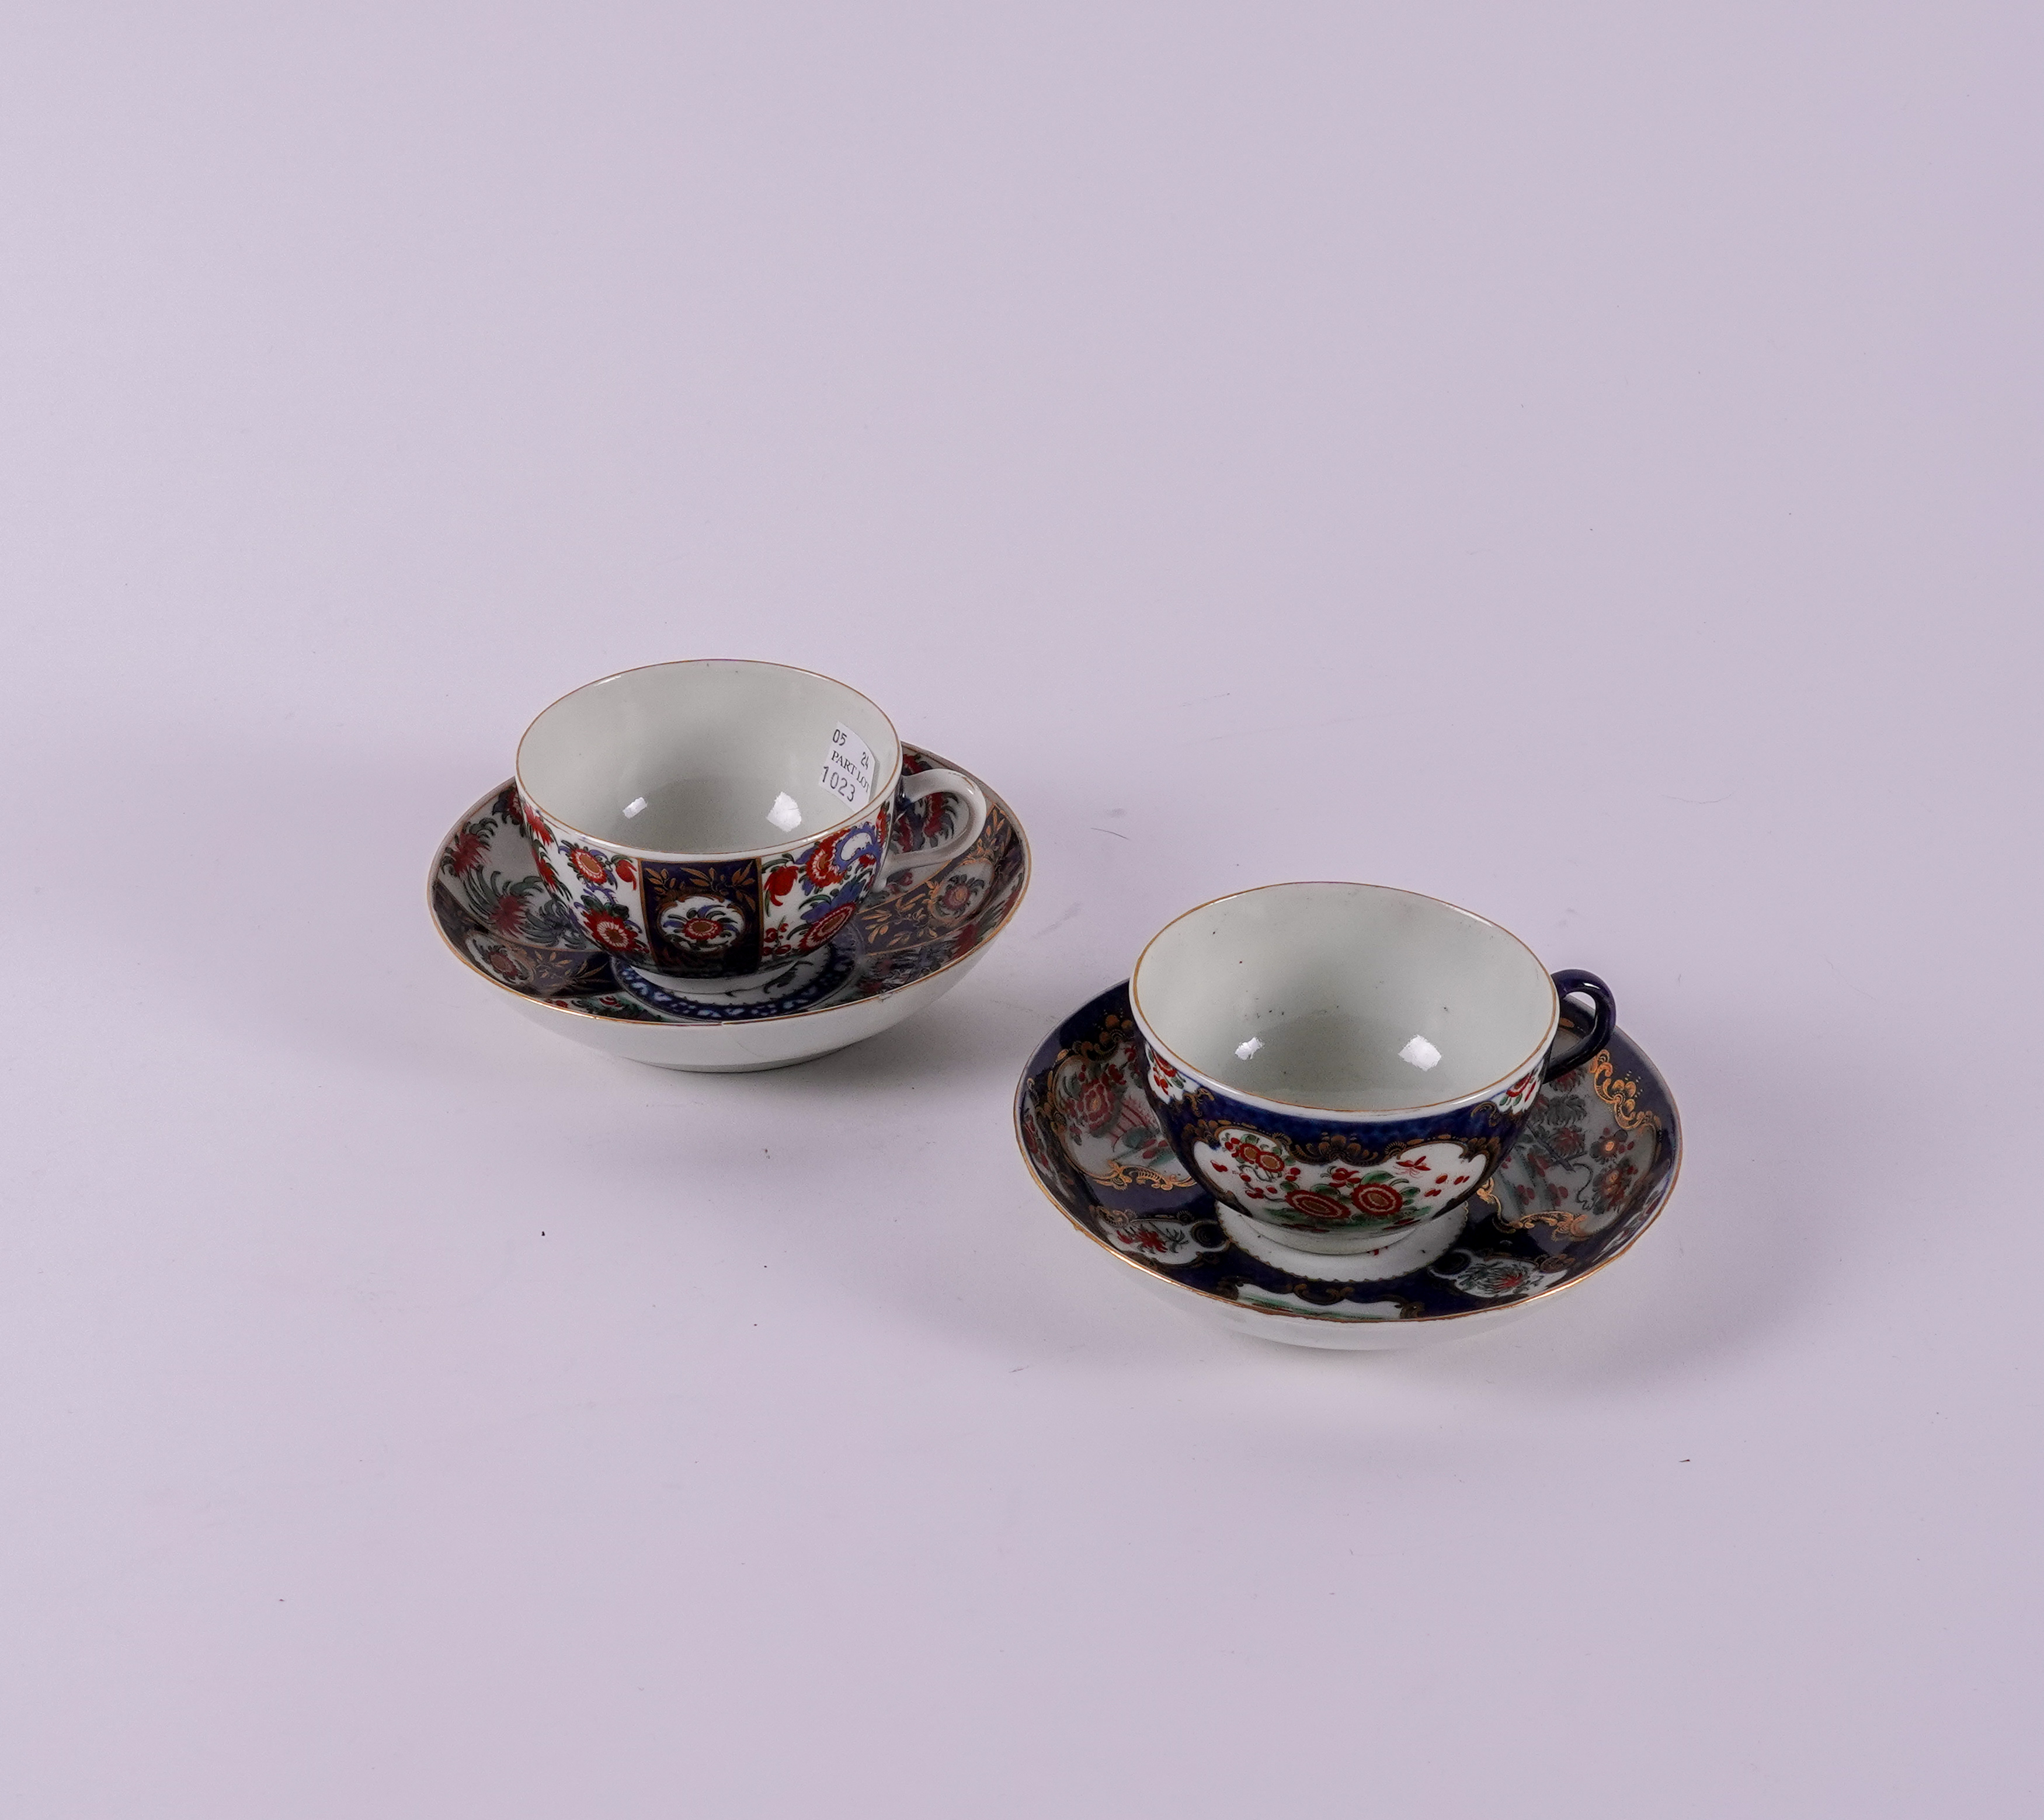 A WORCESTER BLUE-GROUND TEACUP AND SAUCER (4) - Image 2 of 6